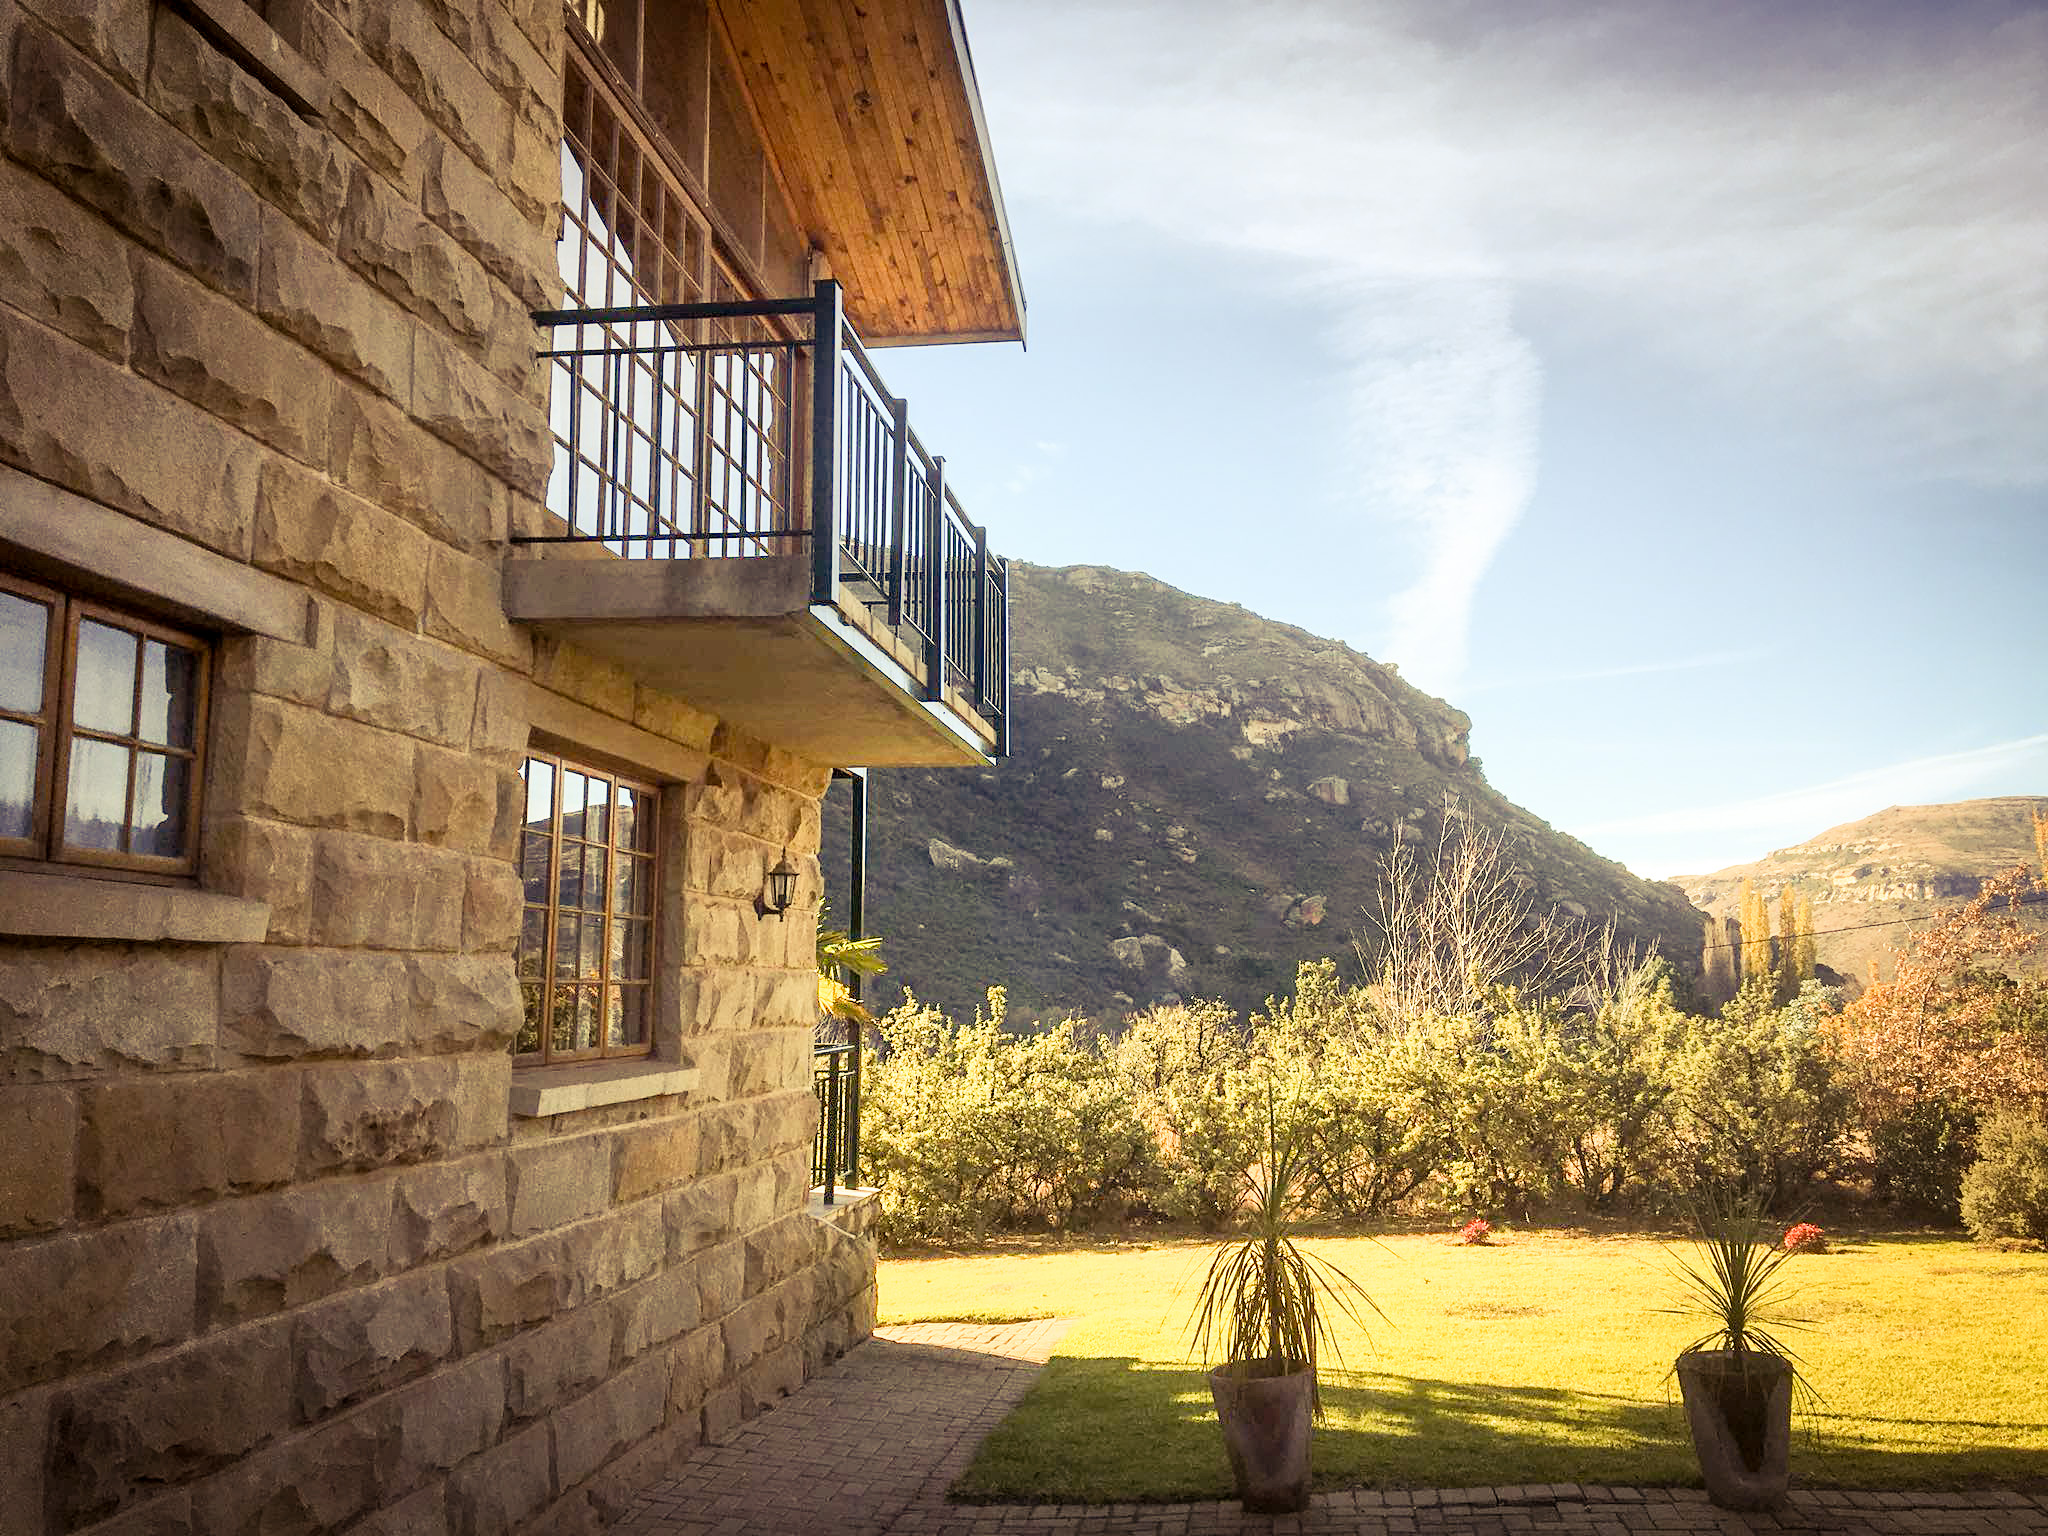 The Square - Clarens Country Stay